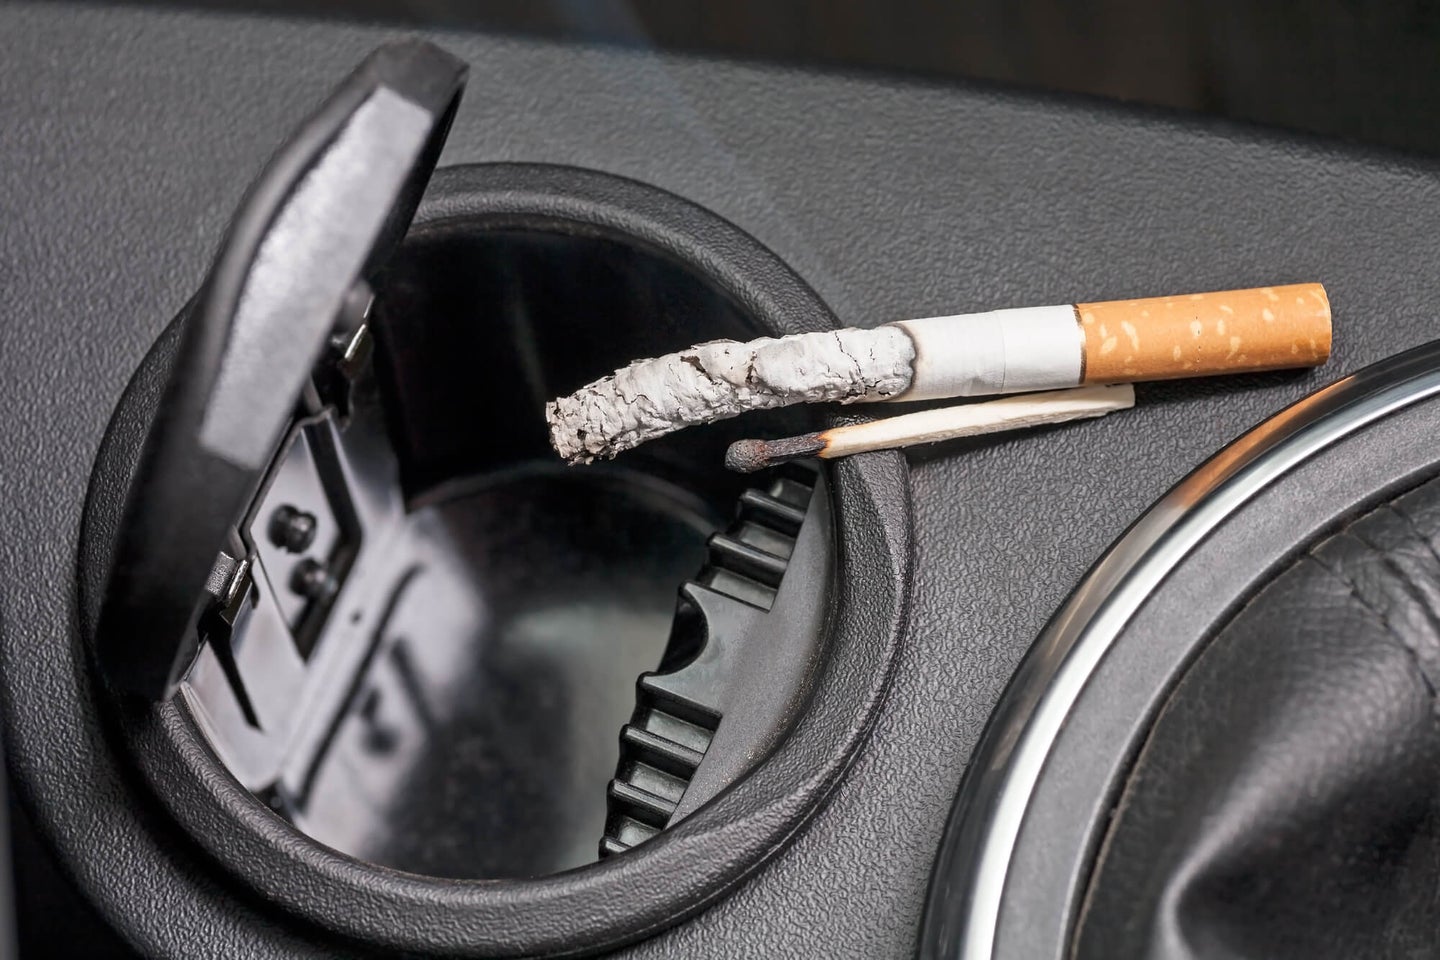 Best Car Ashtrays: Prevent Odors and Remain Safe